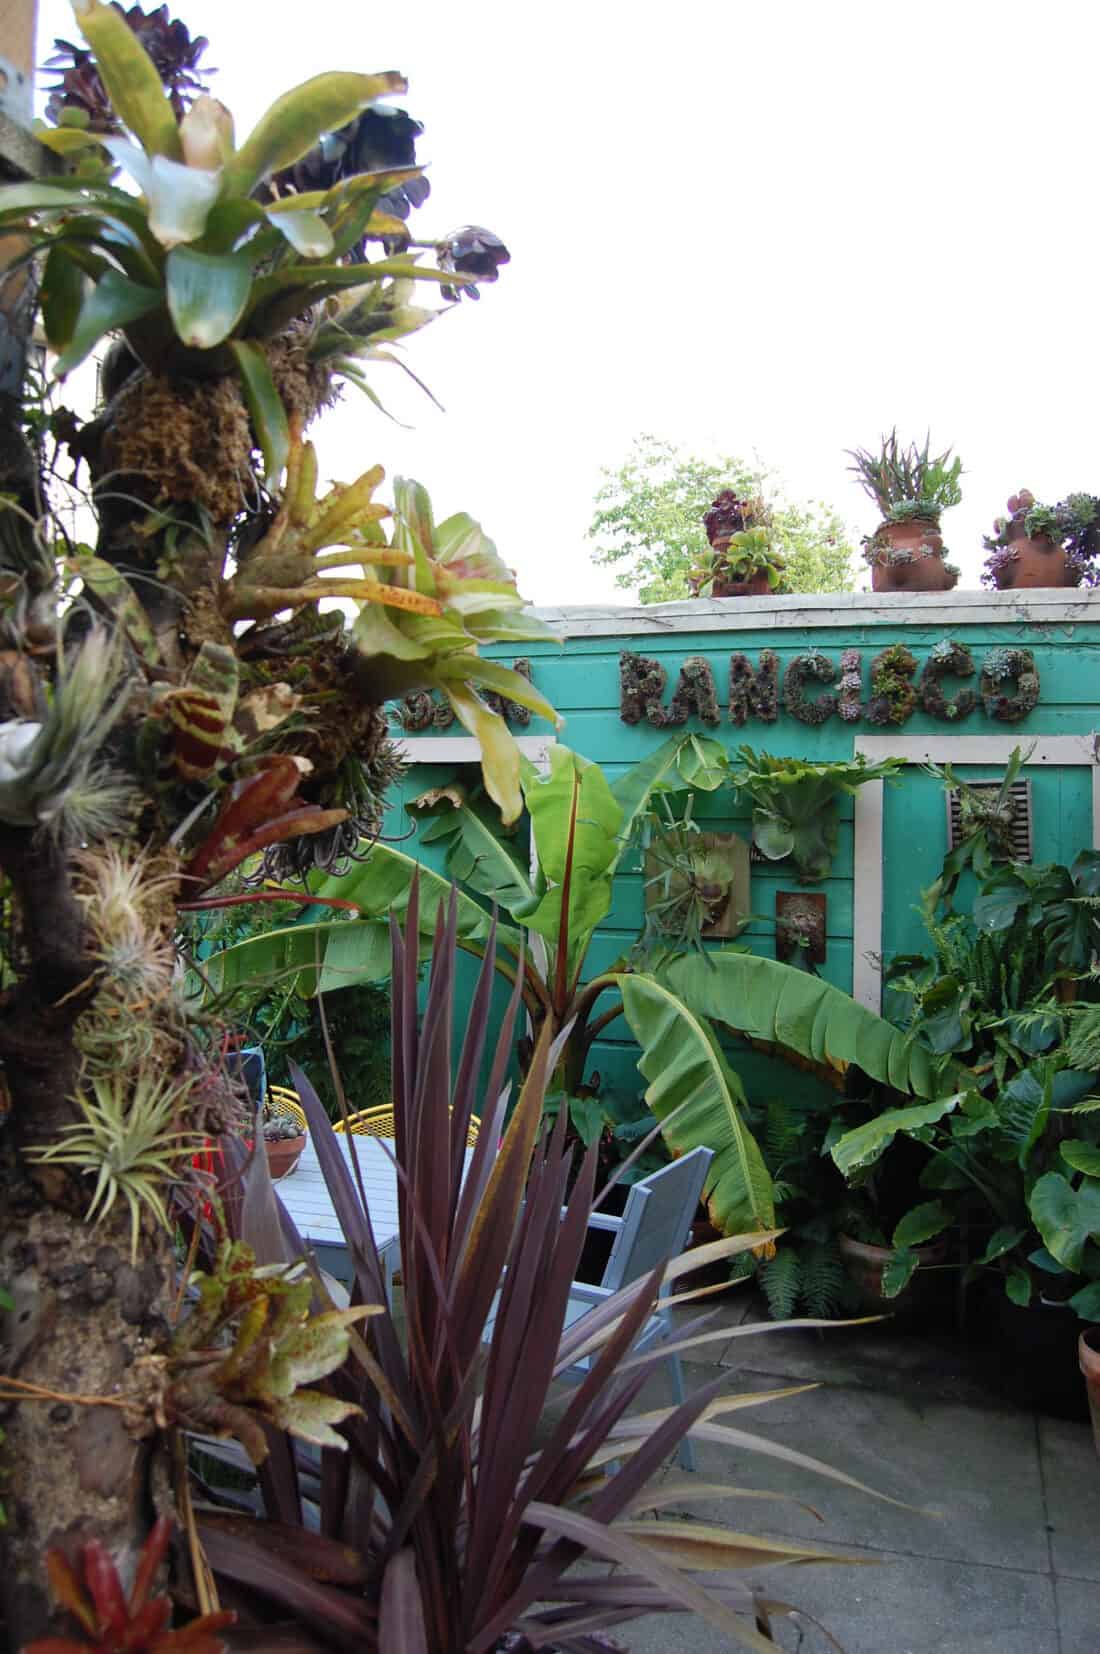 A succulent garden with various plants including bromeliads and large leafy greens. A rustic wooden sign reading 'Rancho' is visible in the background above a teal wooden structure.